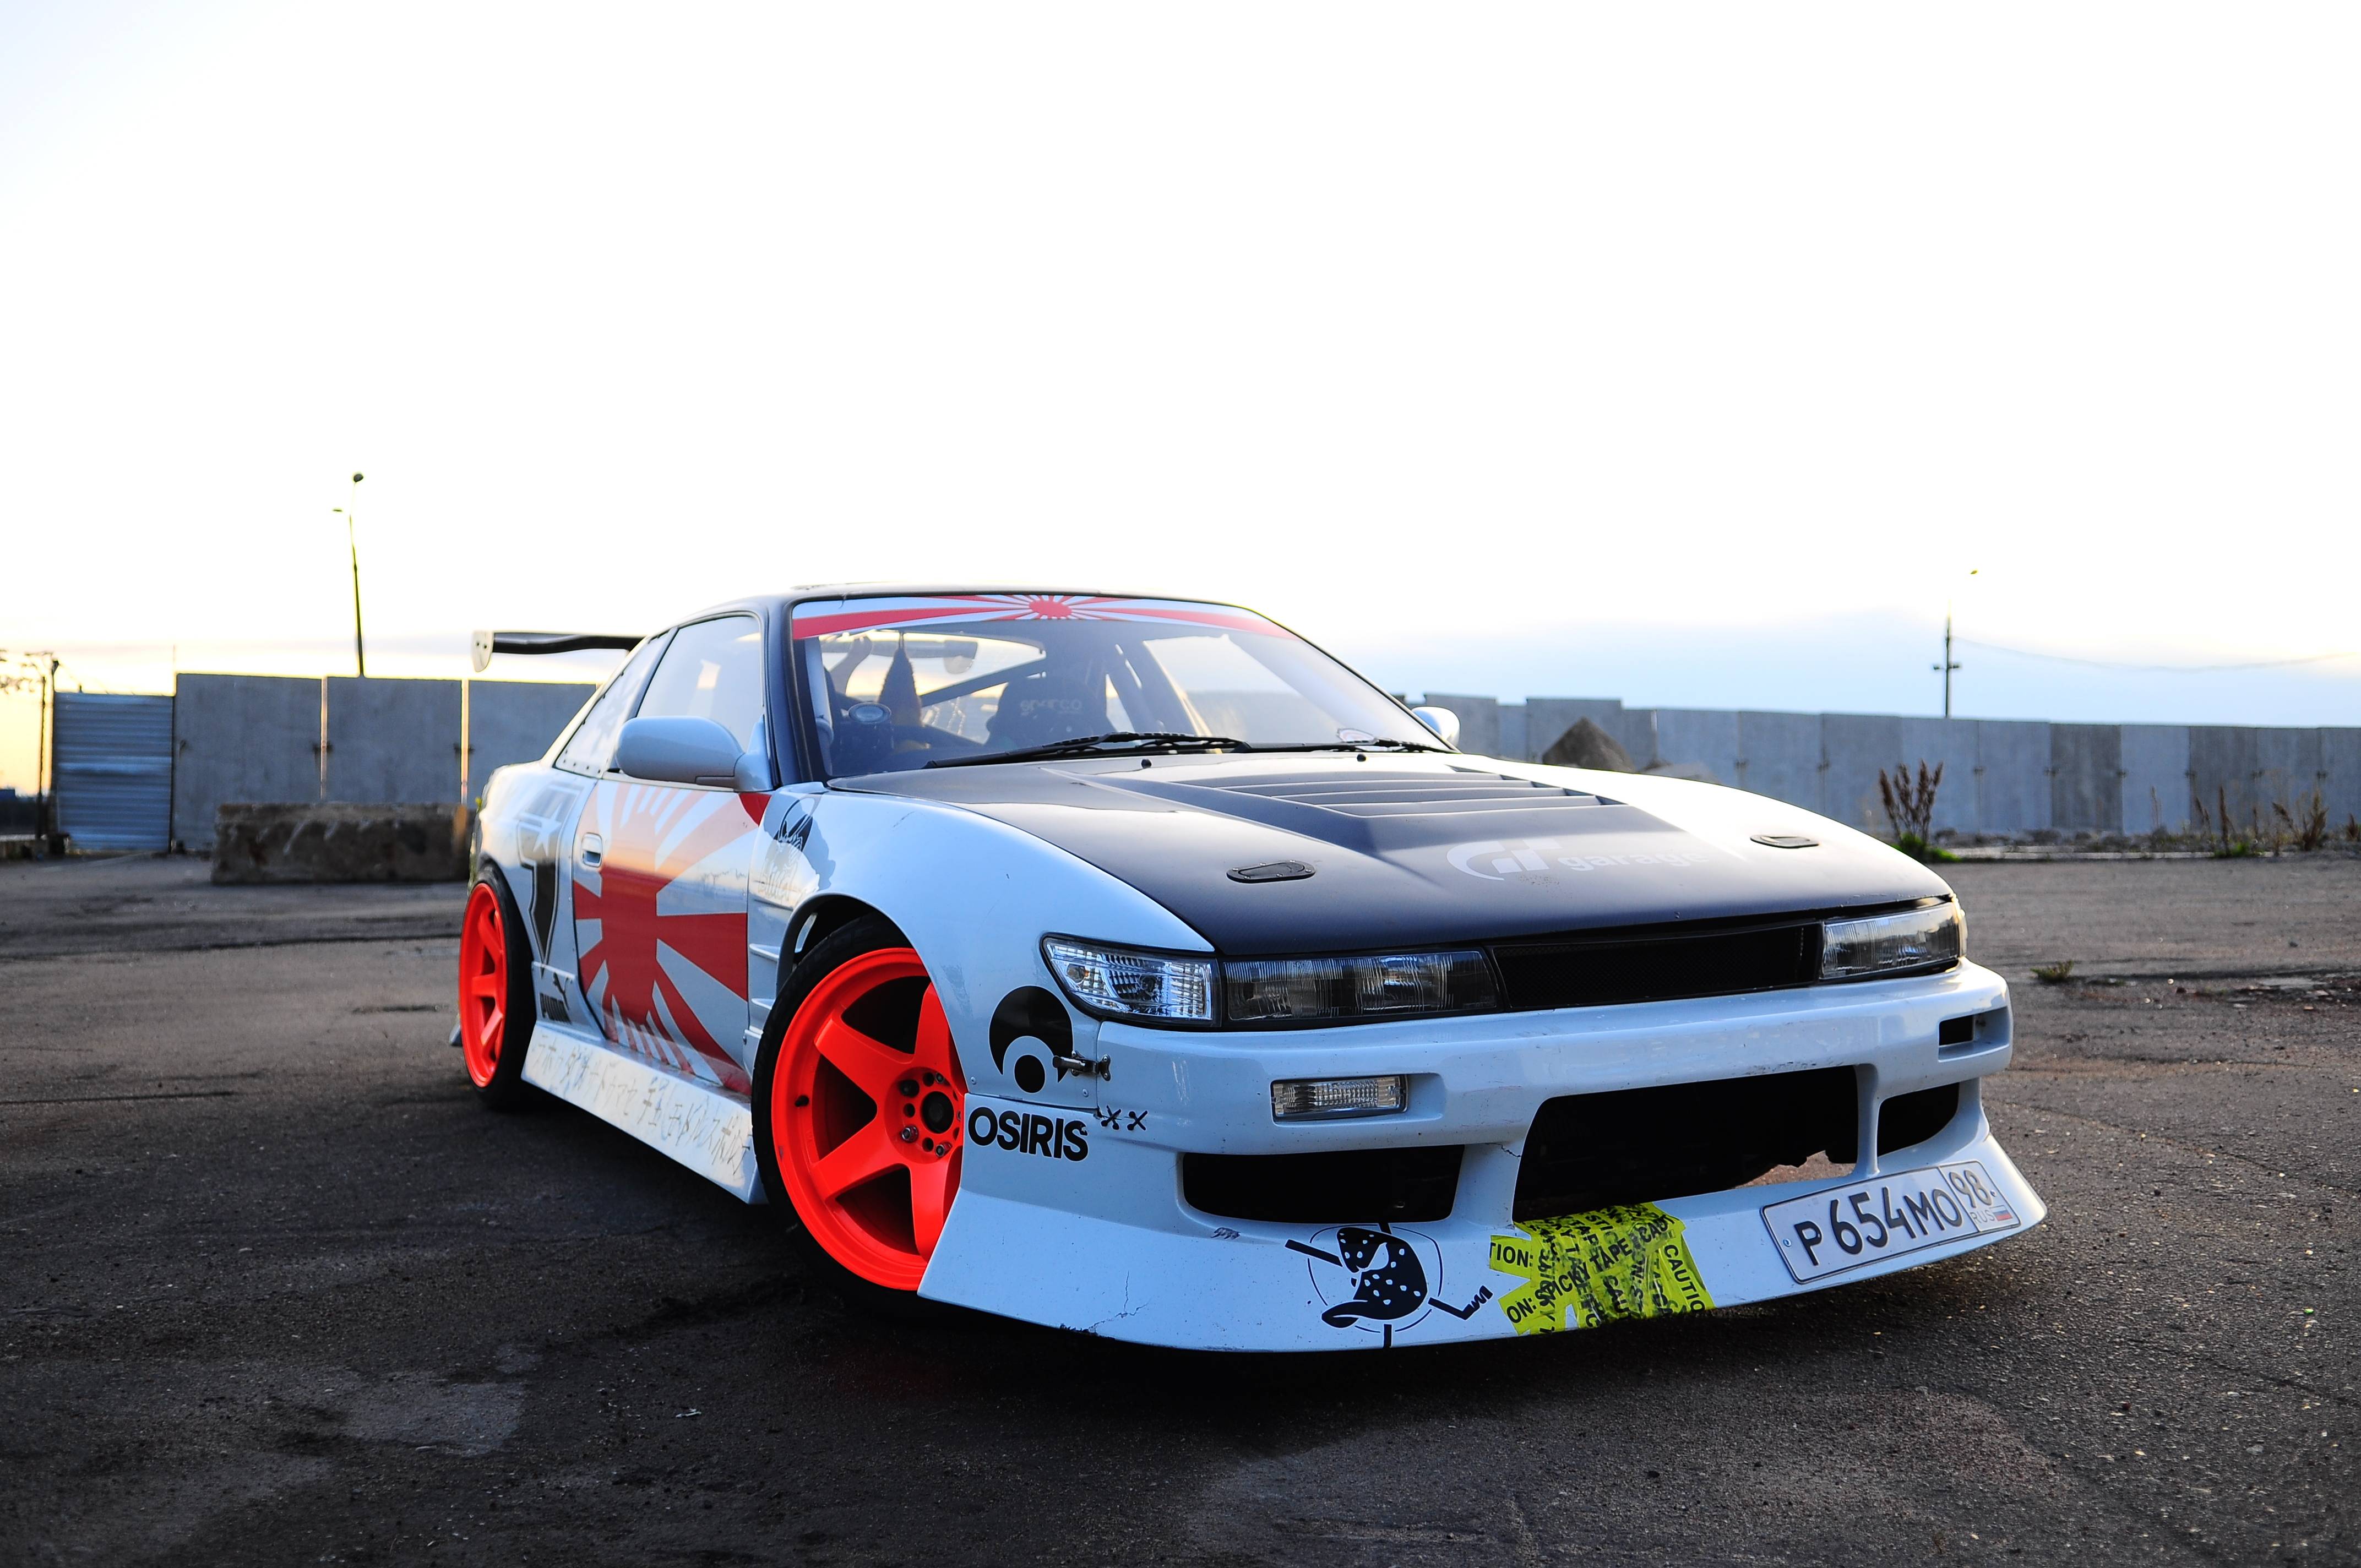 1920x1200 1920x1200 Nissan Silvia S13 wallpaper for your PC, laptop, tablet and mobile devices - JDM